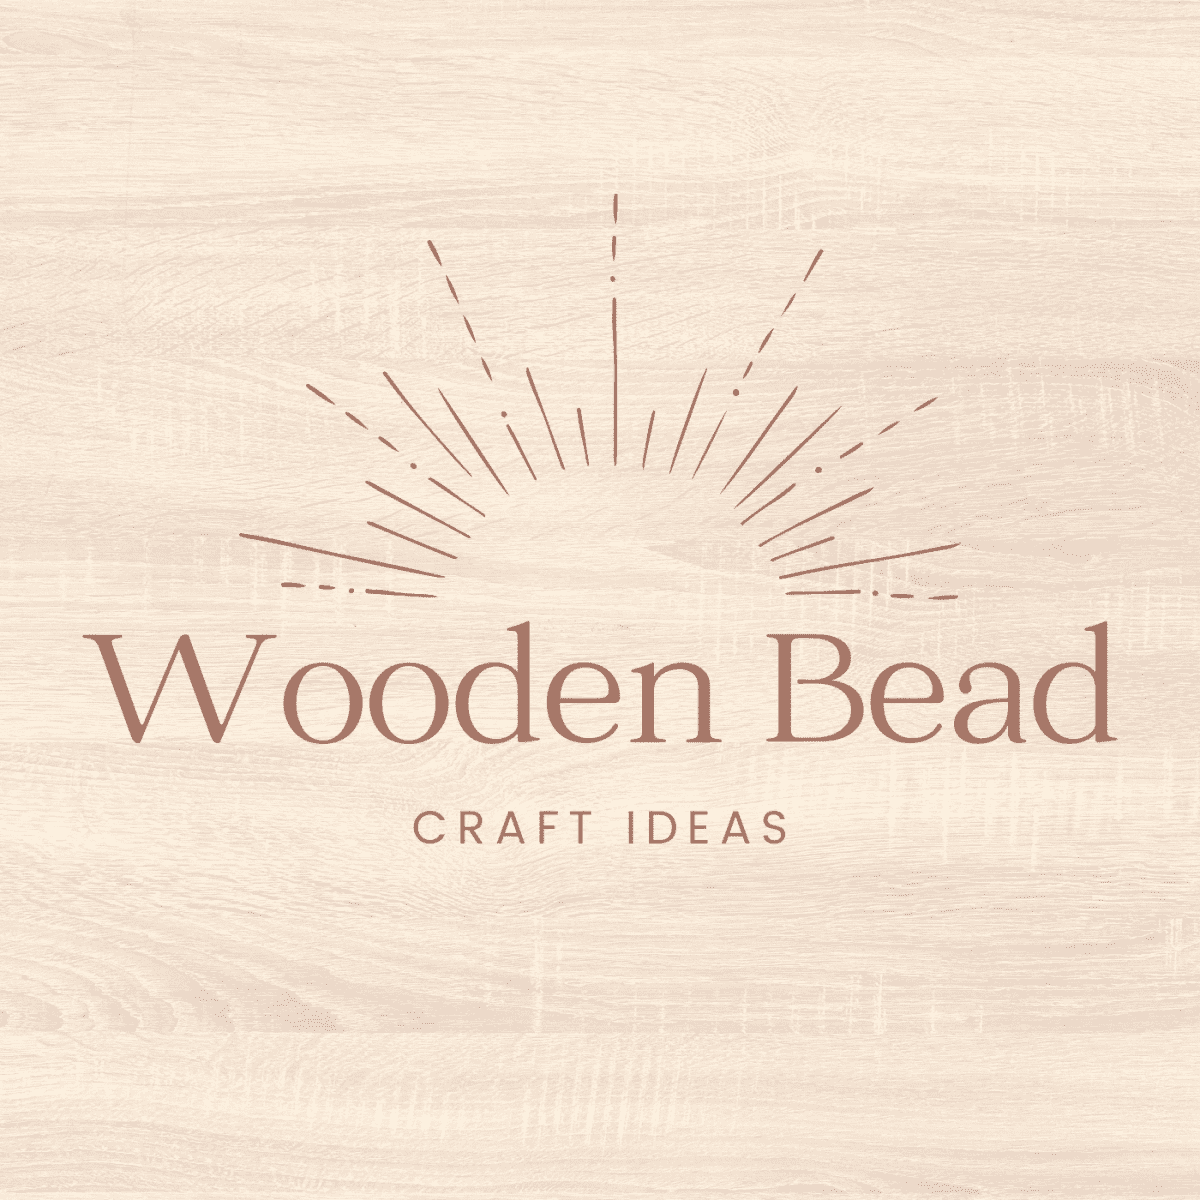 Wooden Craft Beads -   How to make beads, Wooden crafts, Bead